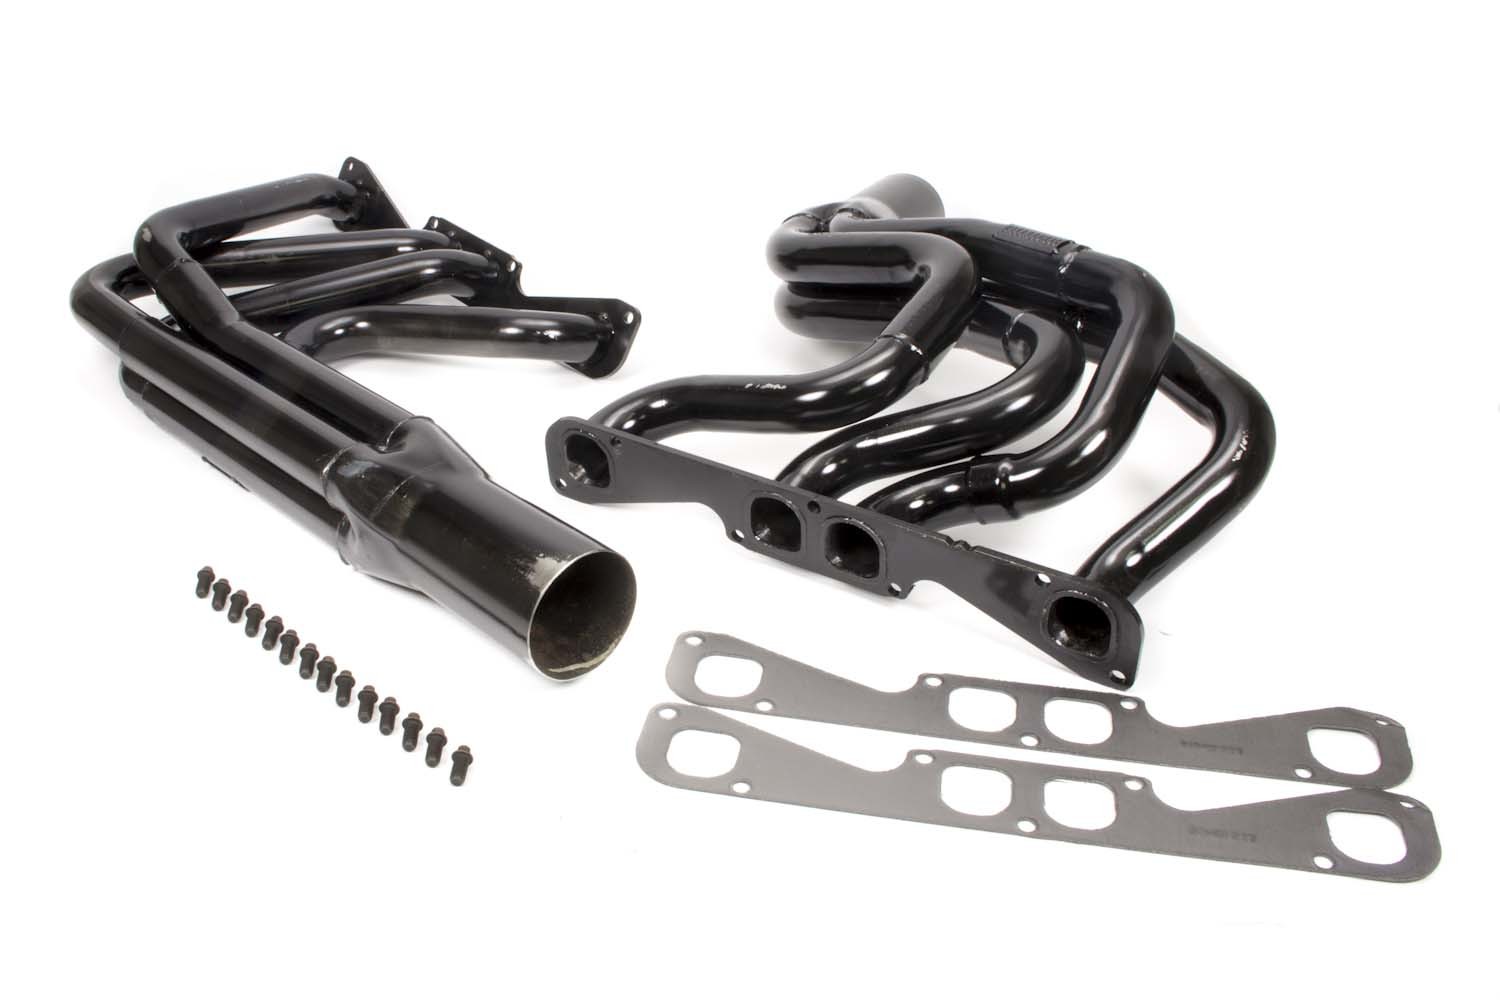 SCHOENFELD Headers, IMCA Modified, 1-3/4 to 1-7/8" Primary, 3-1/2" Collector, Steel, Black Paint, Small Block Chevy, Kit